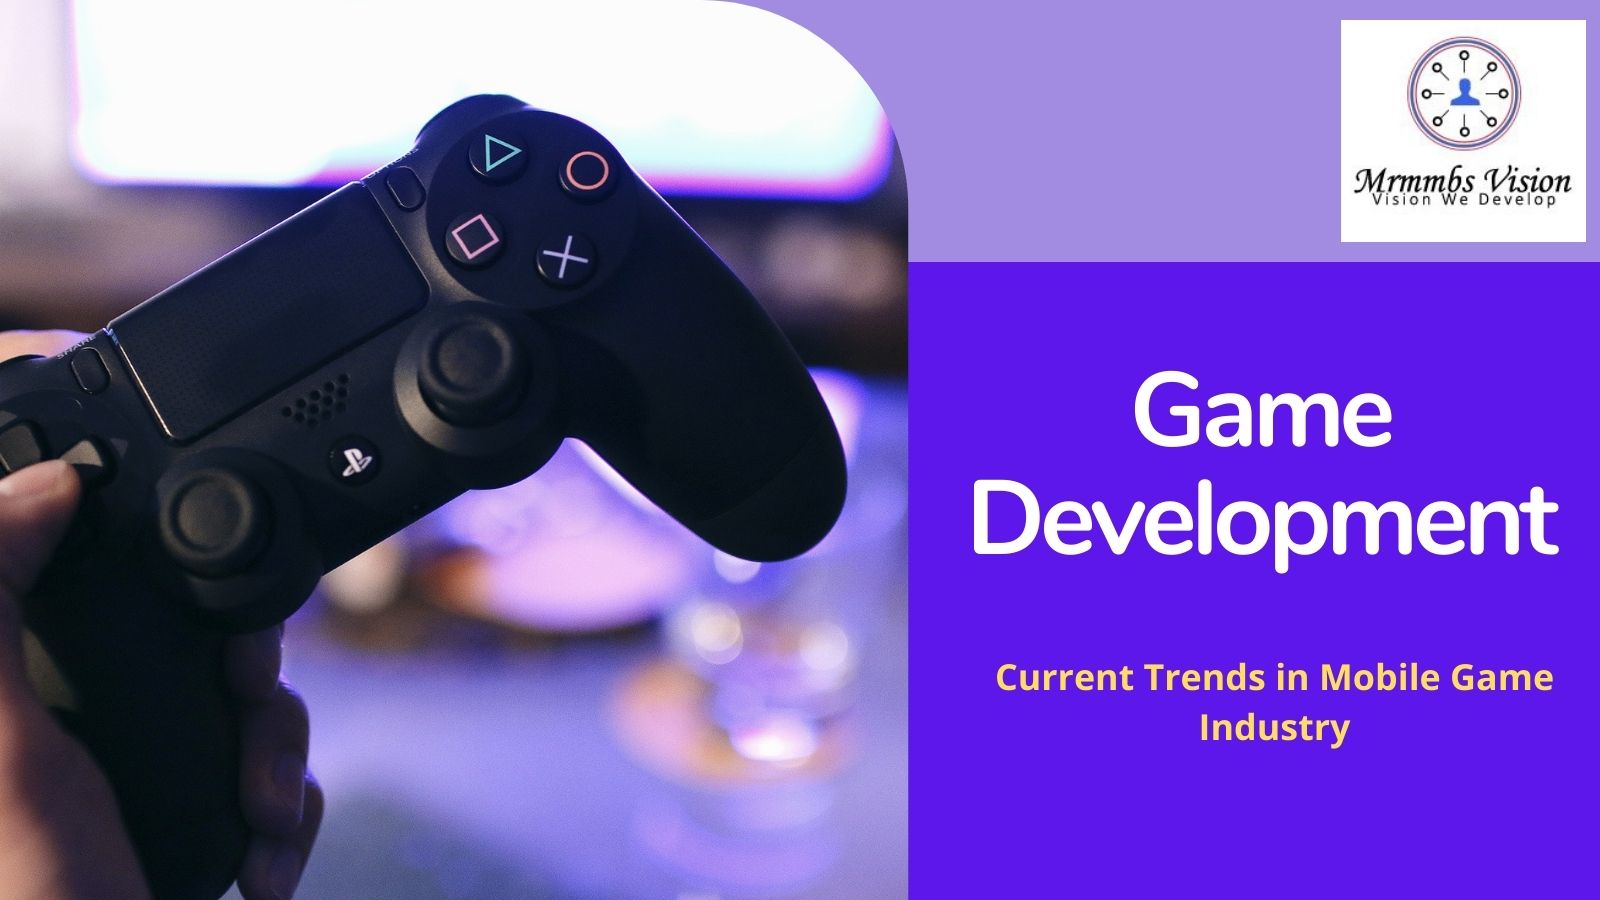 Game Development: Current Trends in Mobile Game Industry